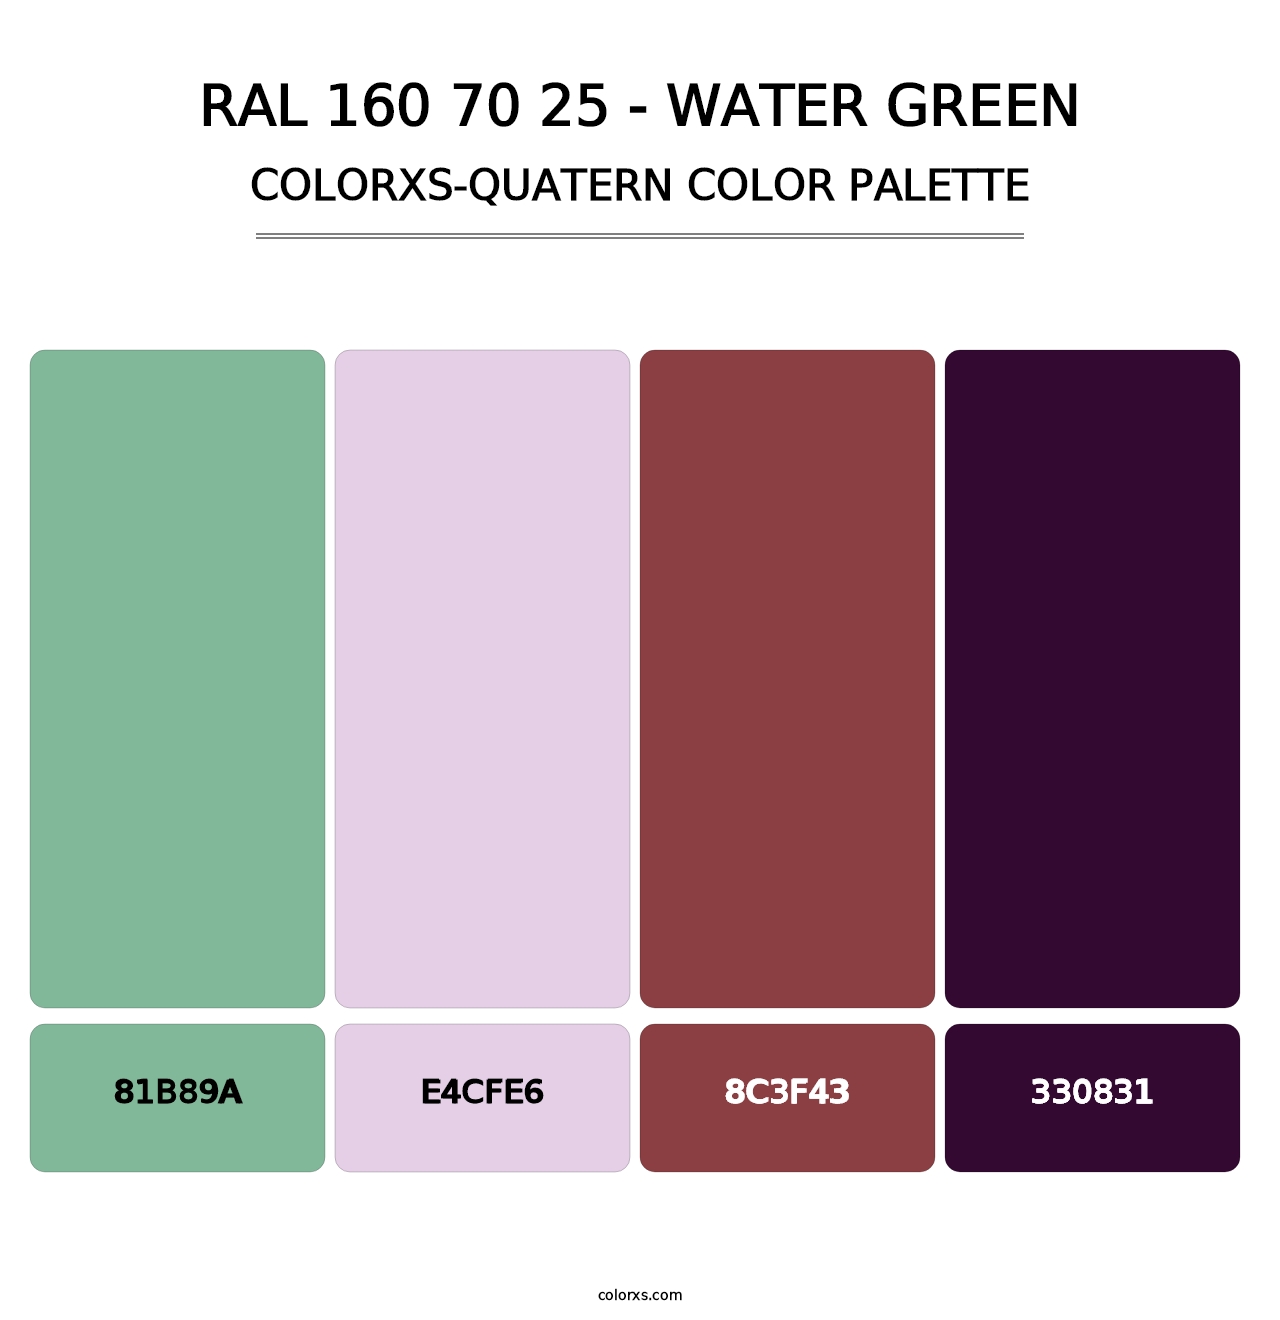 RAL 160 70 25 - Water Green - Colorxs Quatern Palette